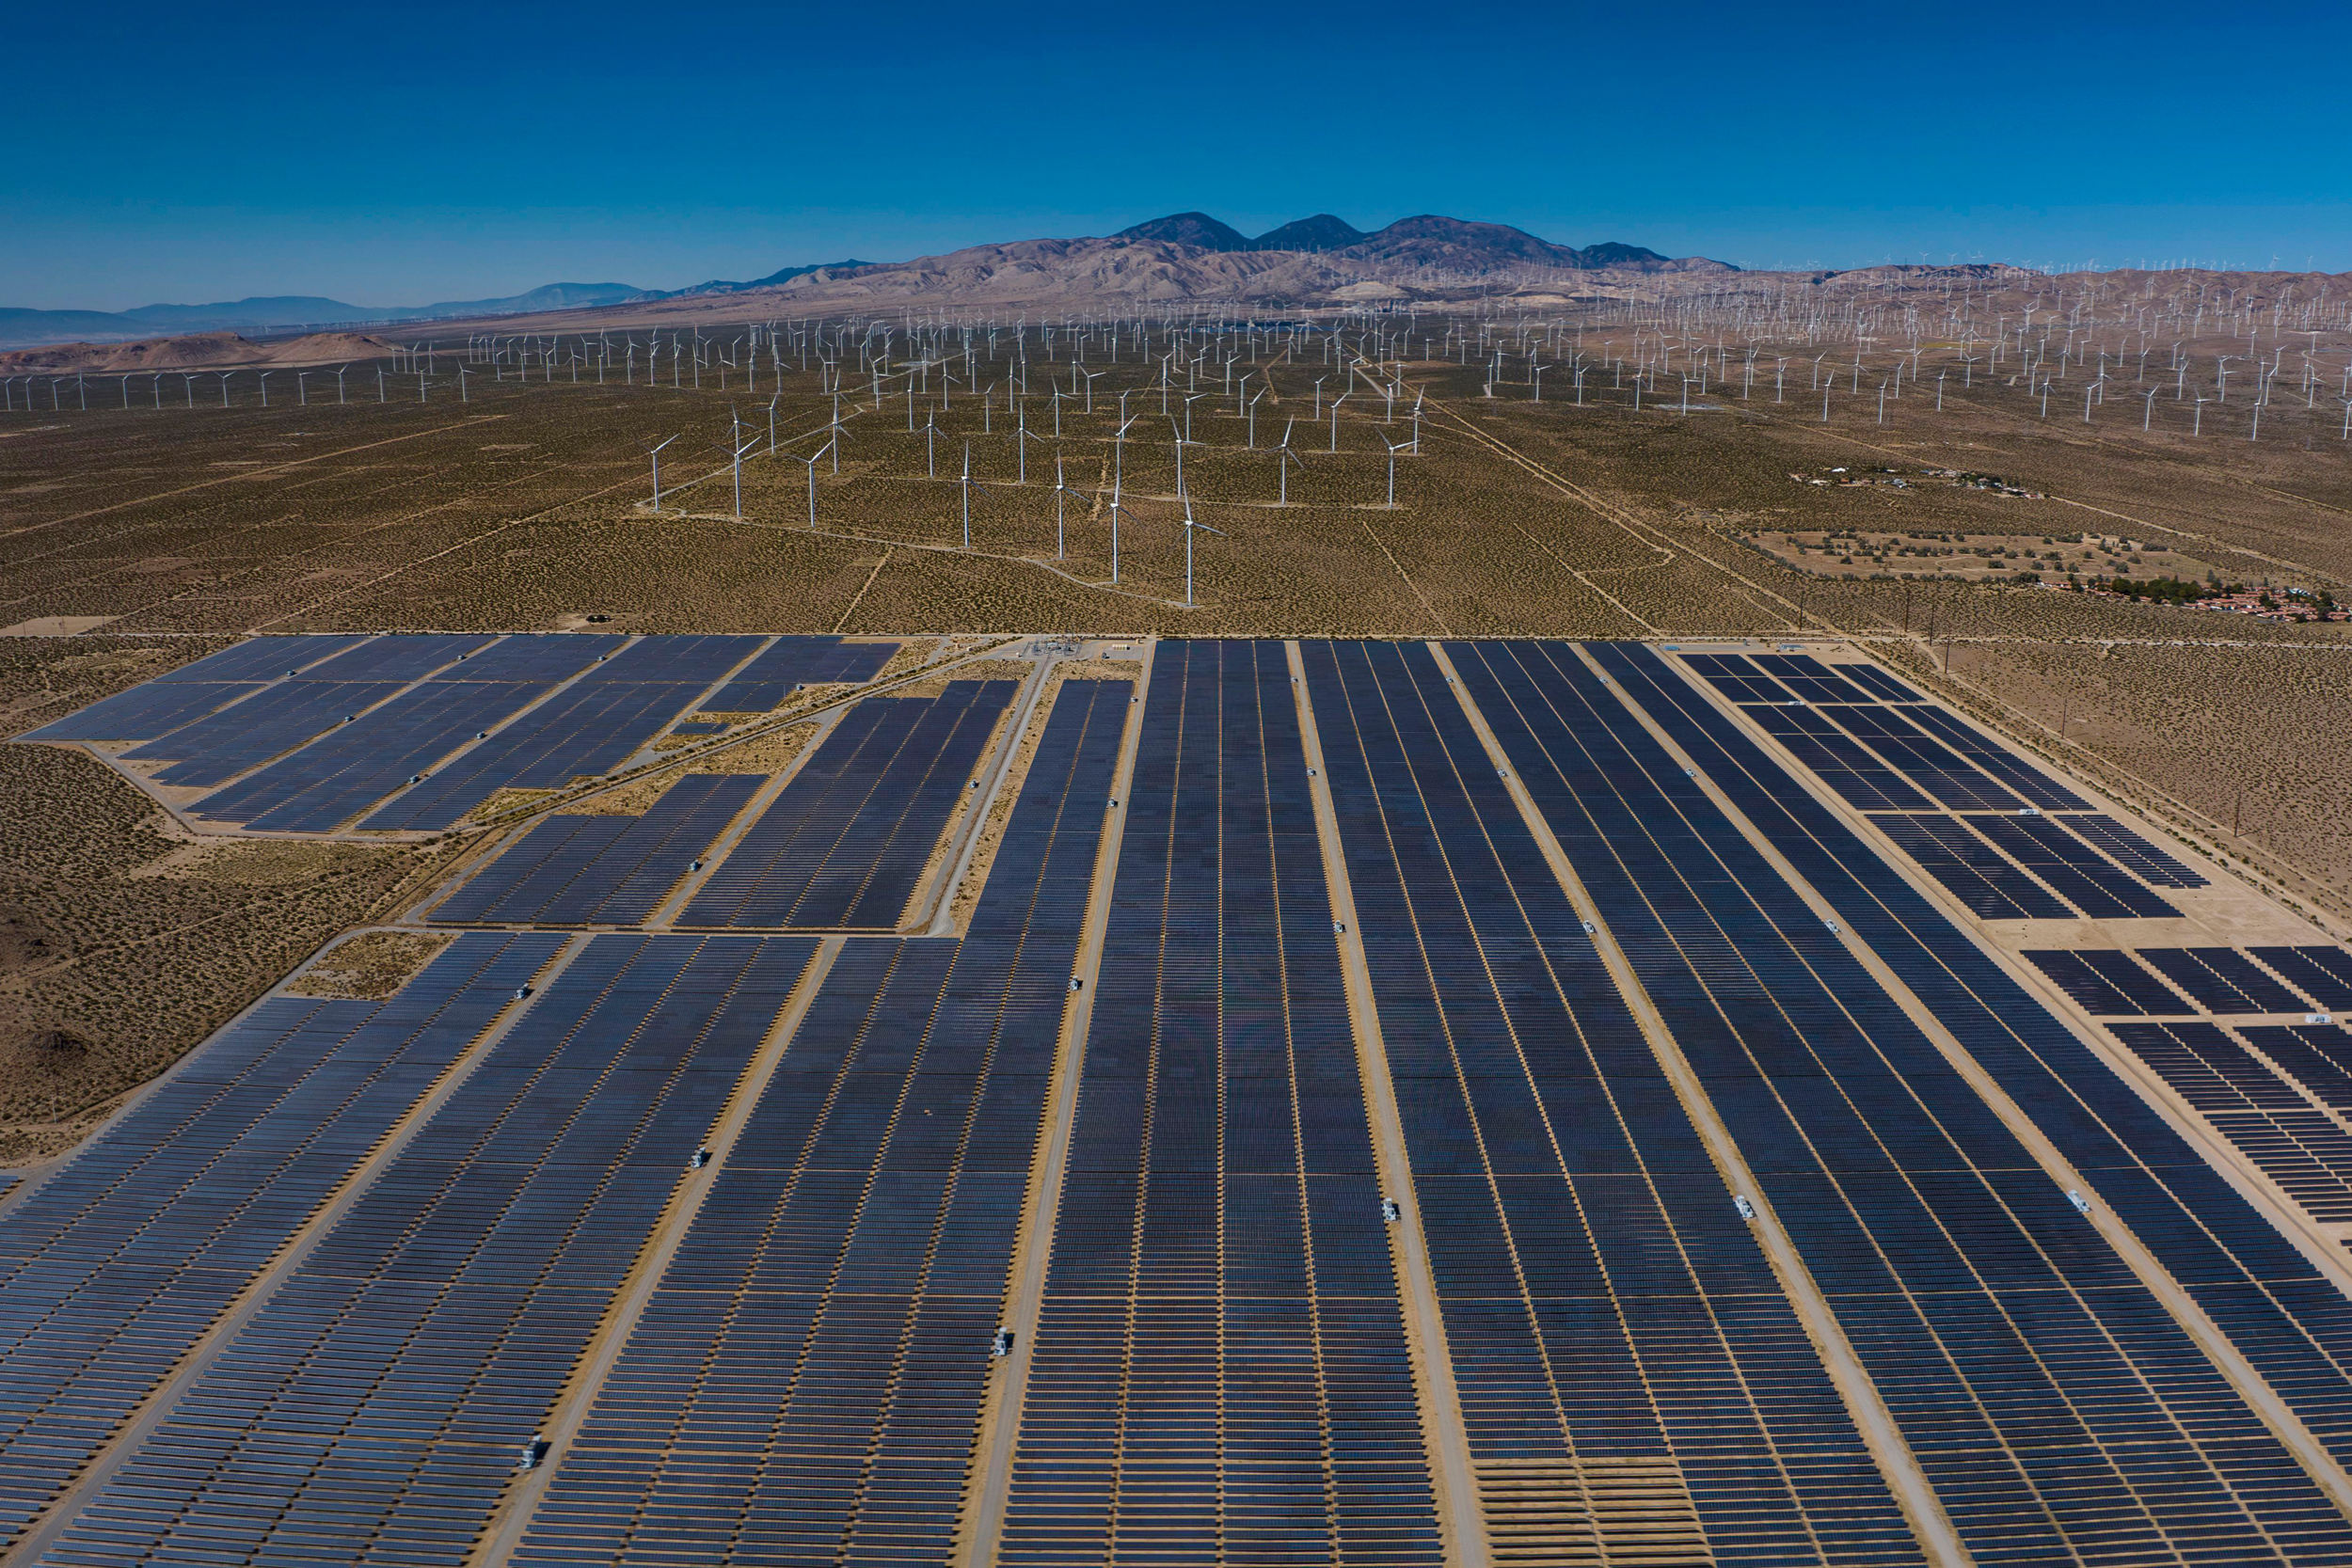 Wind turbines and solar panels merge in the desert of Mojave, Calif. Credit: Visions of America/Joe Sohm/Universal Images Group via Getty Images